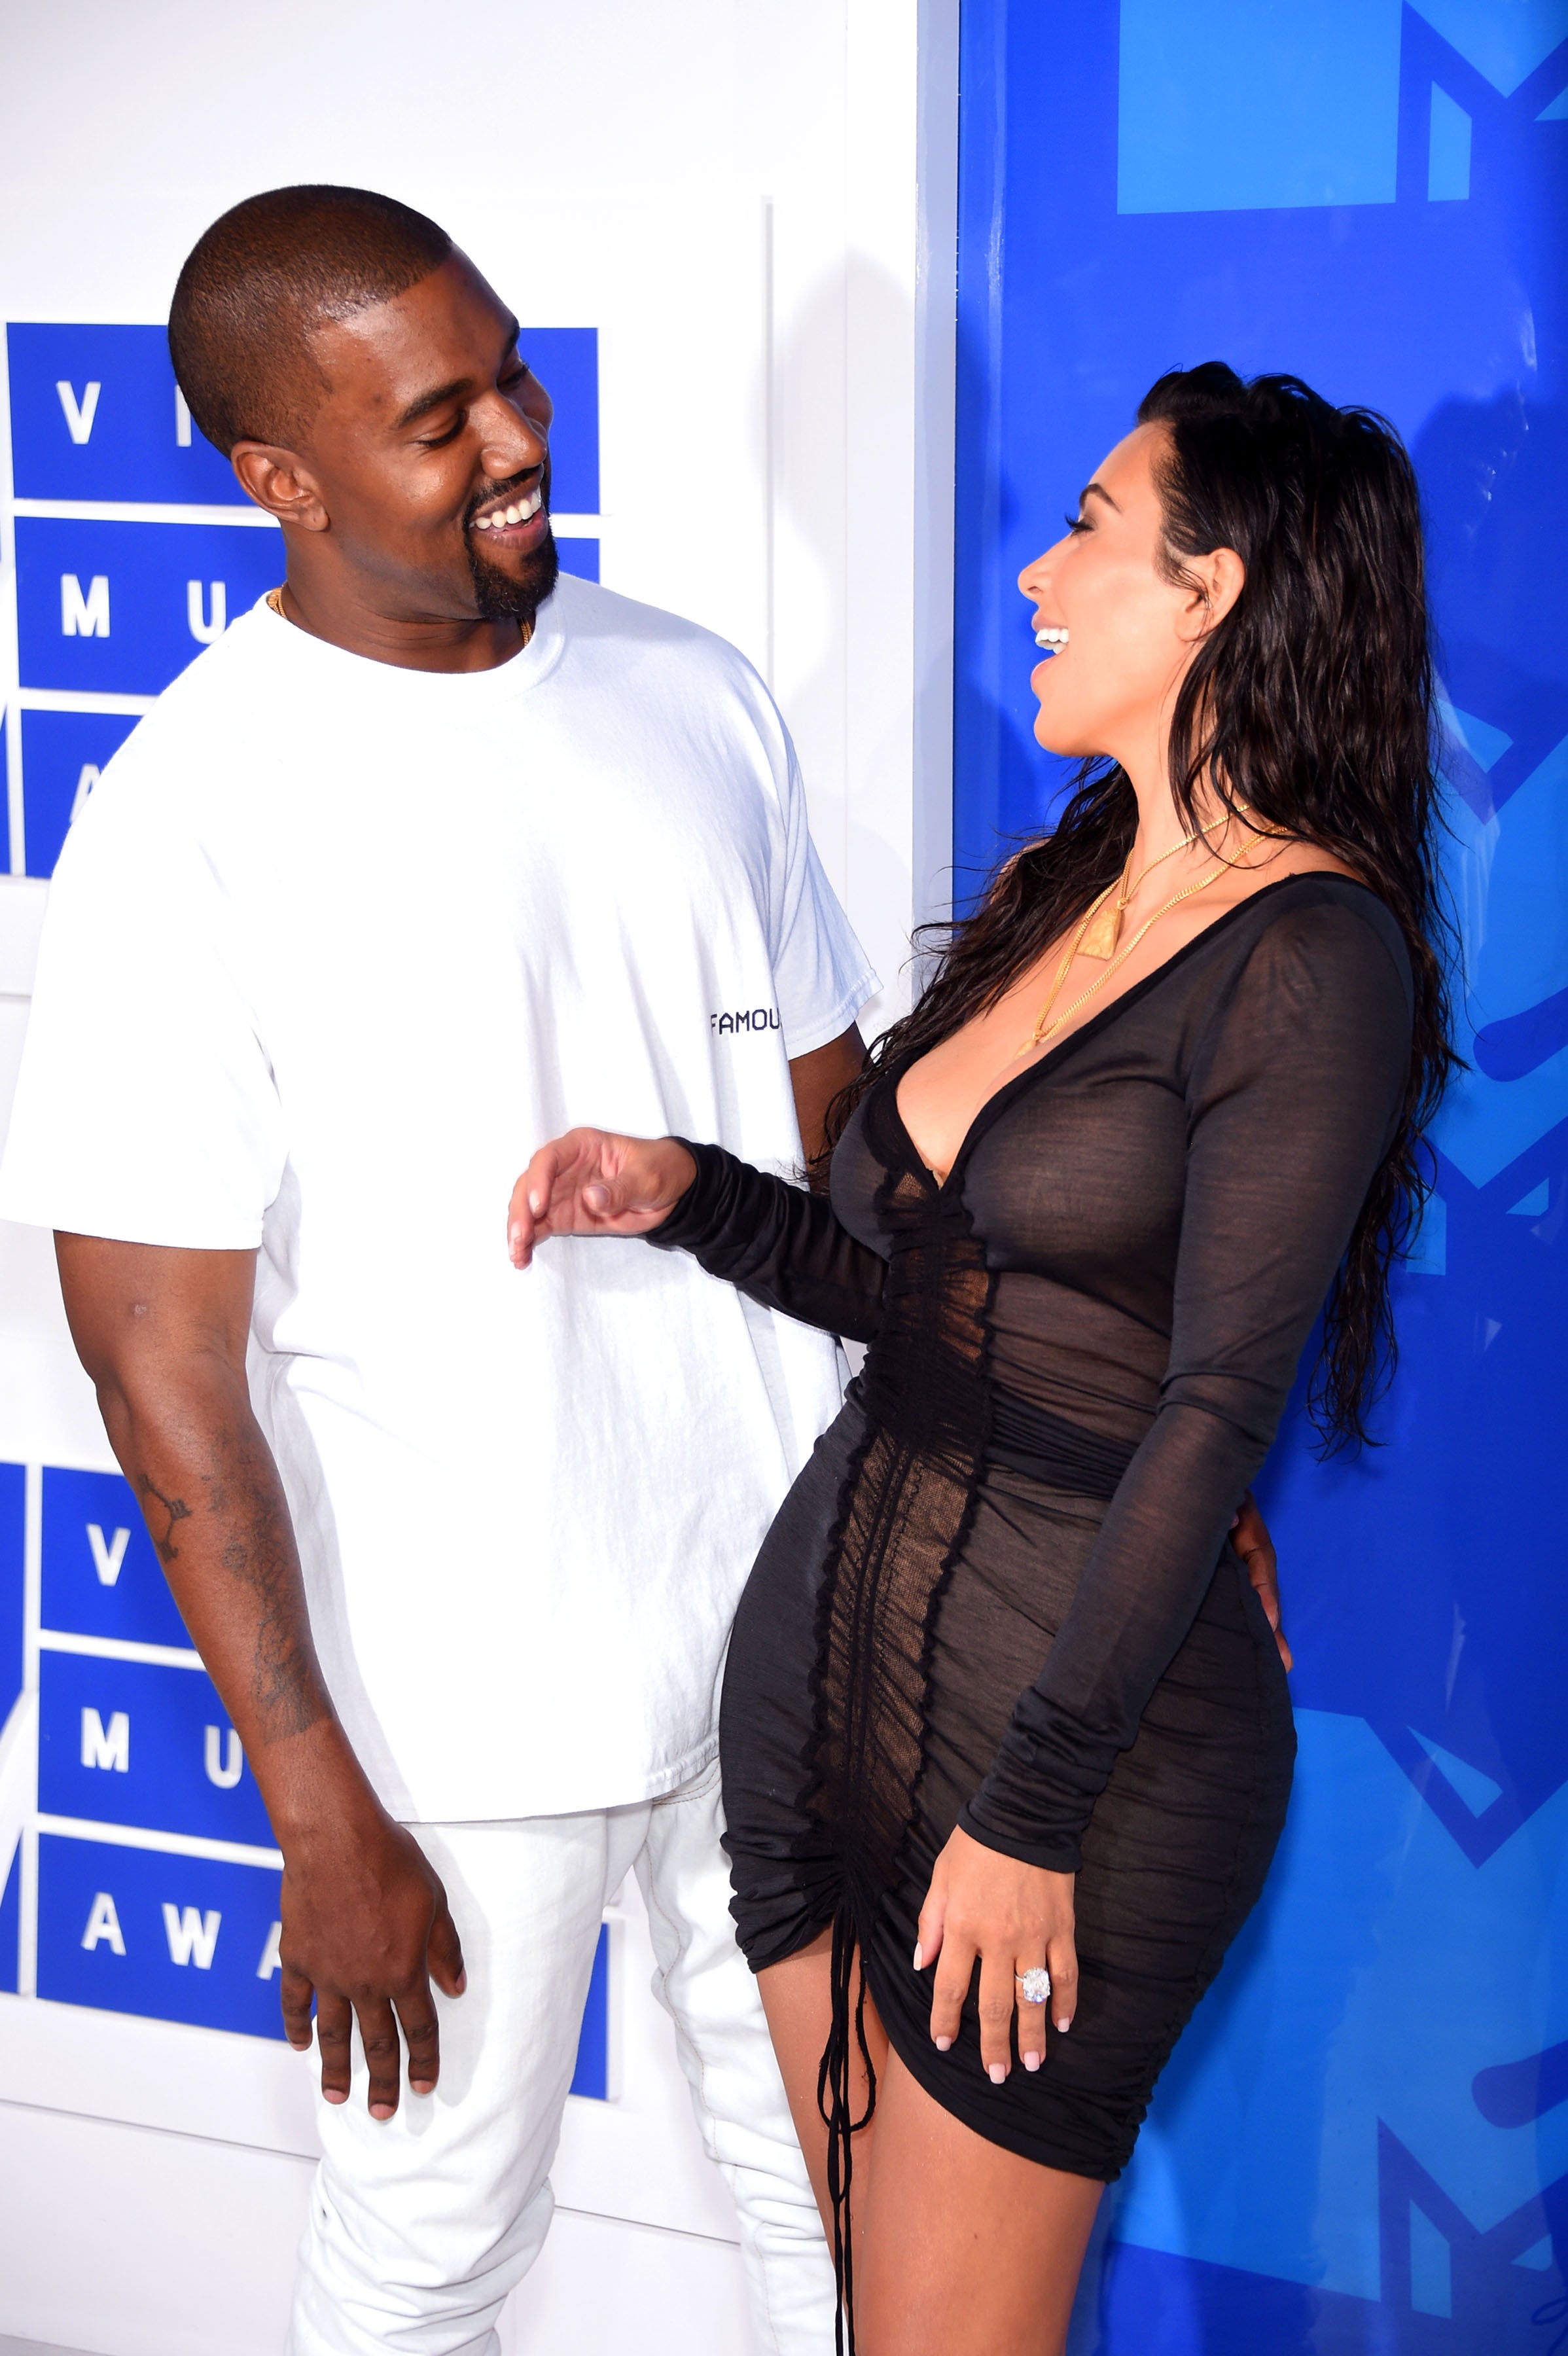 The Cutest Celebrity Couples at the 2016 MTV VMAs
